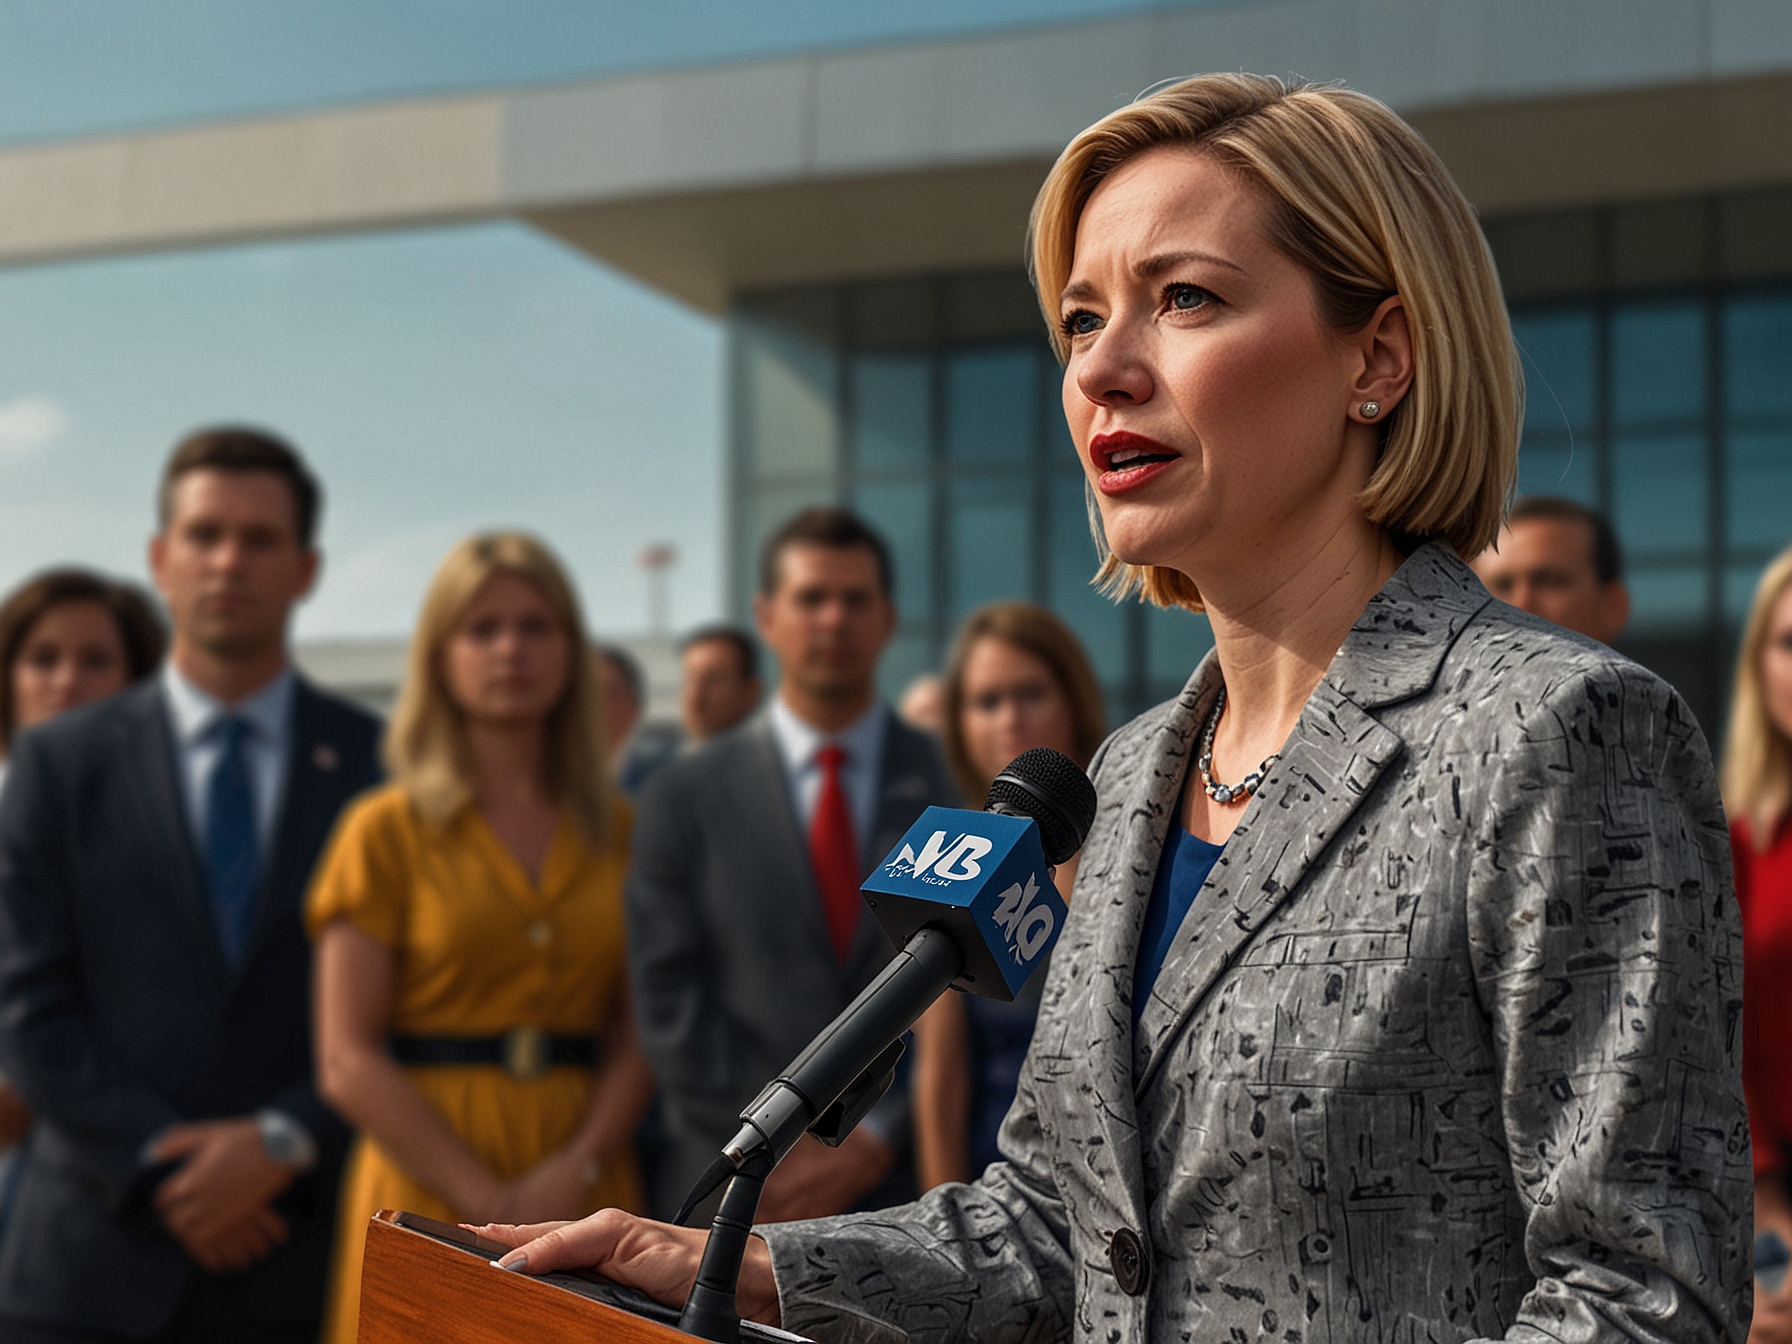 Rep. Victoria Spartz addresses the media outside Dulles Airport, expressing regret and pledging full cooperation following her charges for carrying a concealed weapon in a prohibited area.